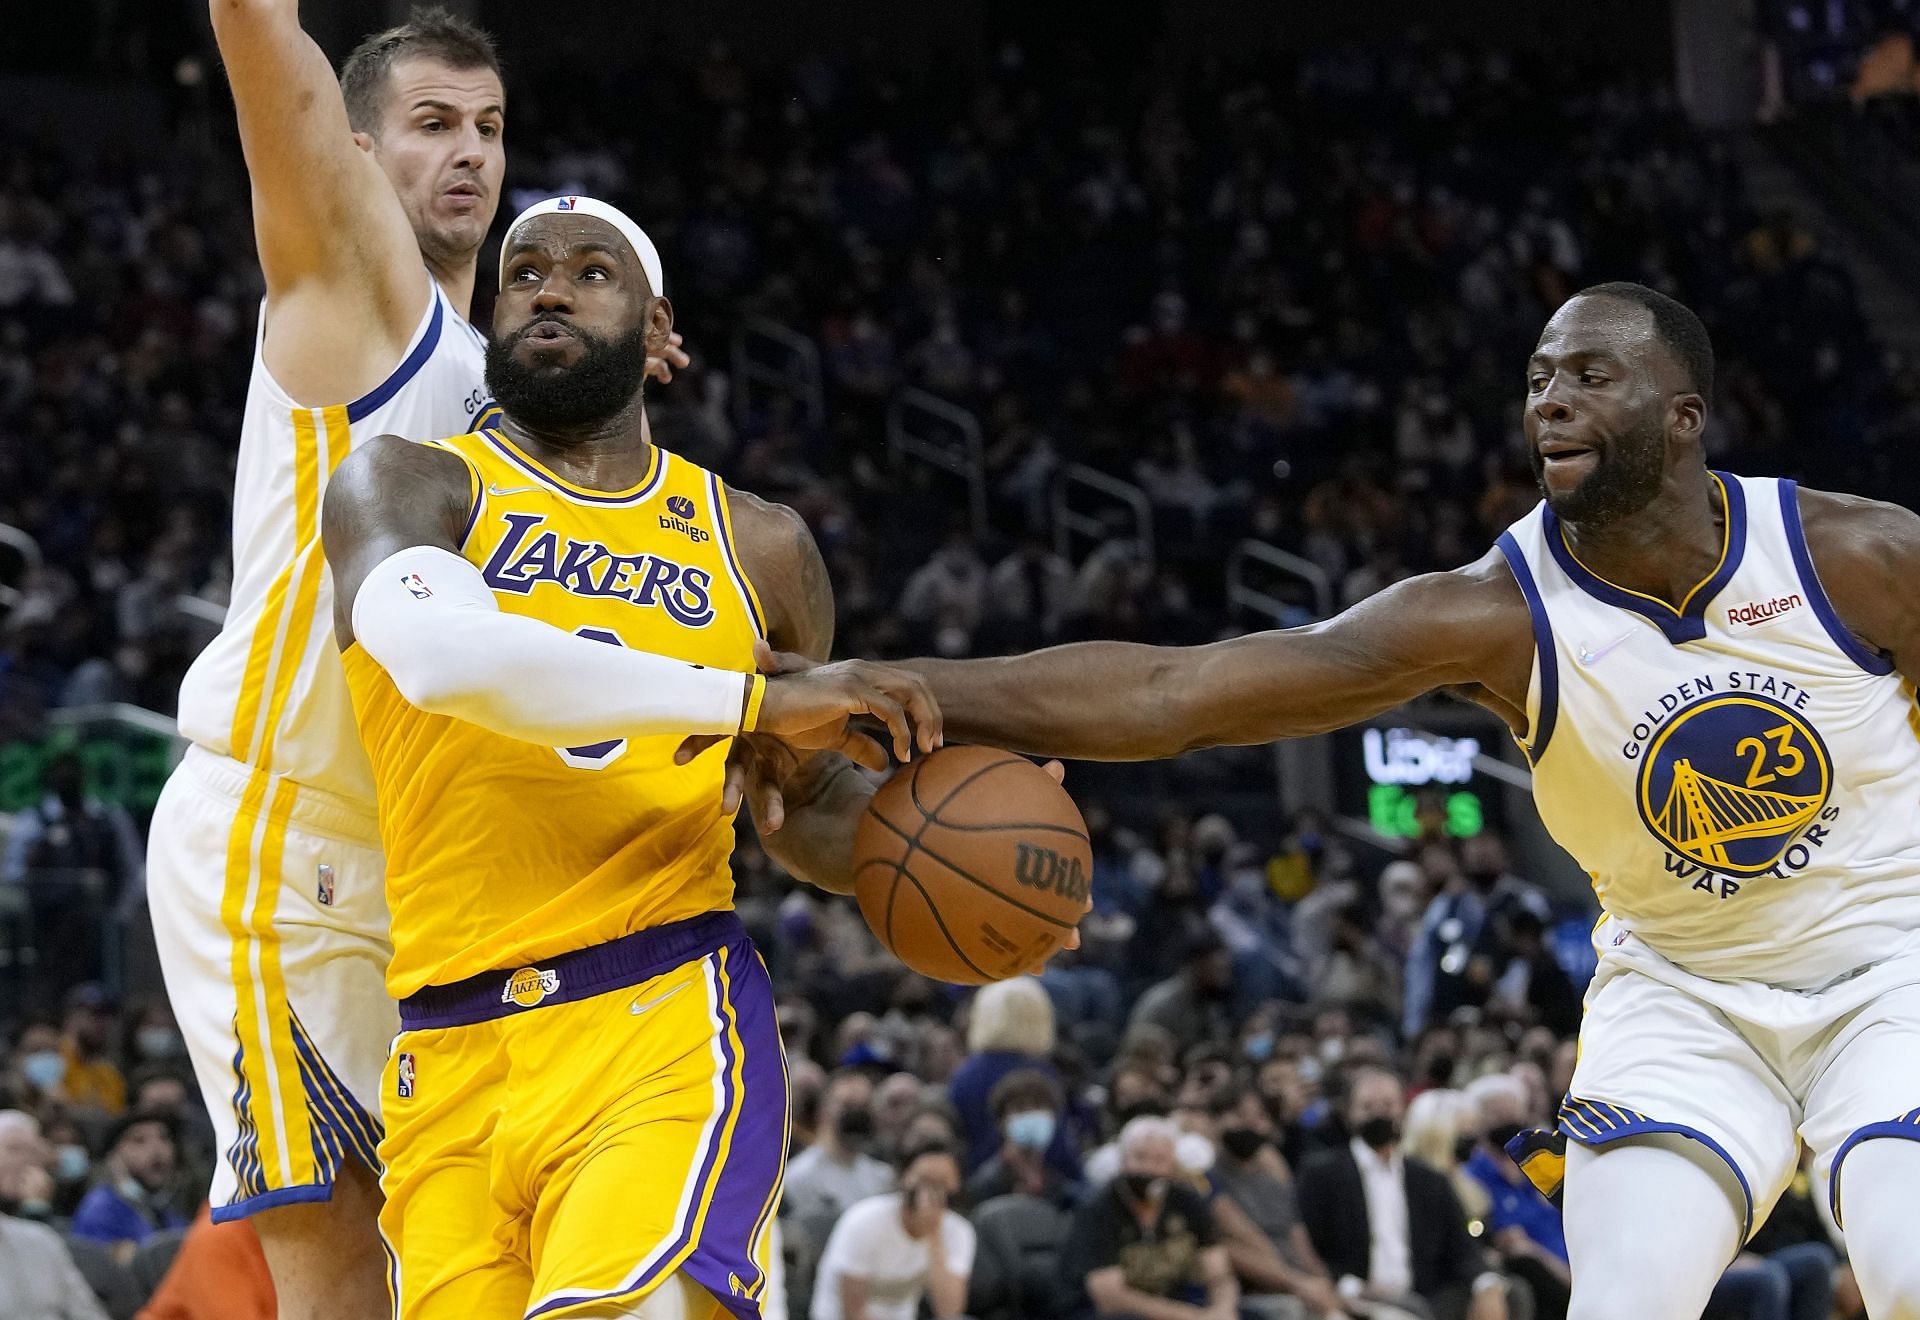 LeBron James of the LA Lakers drives past Draymond Green of the Golden State Warriors.